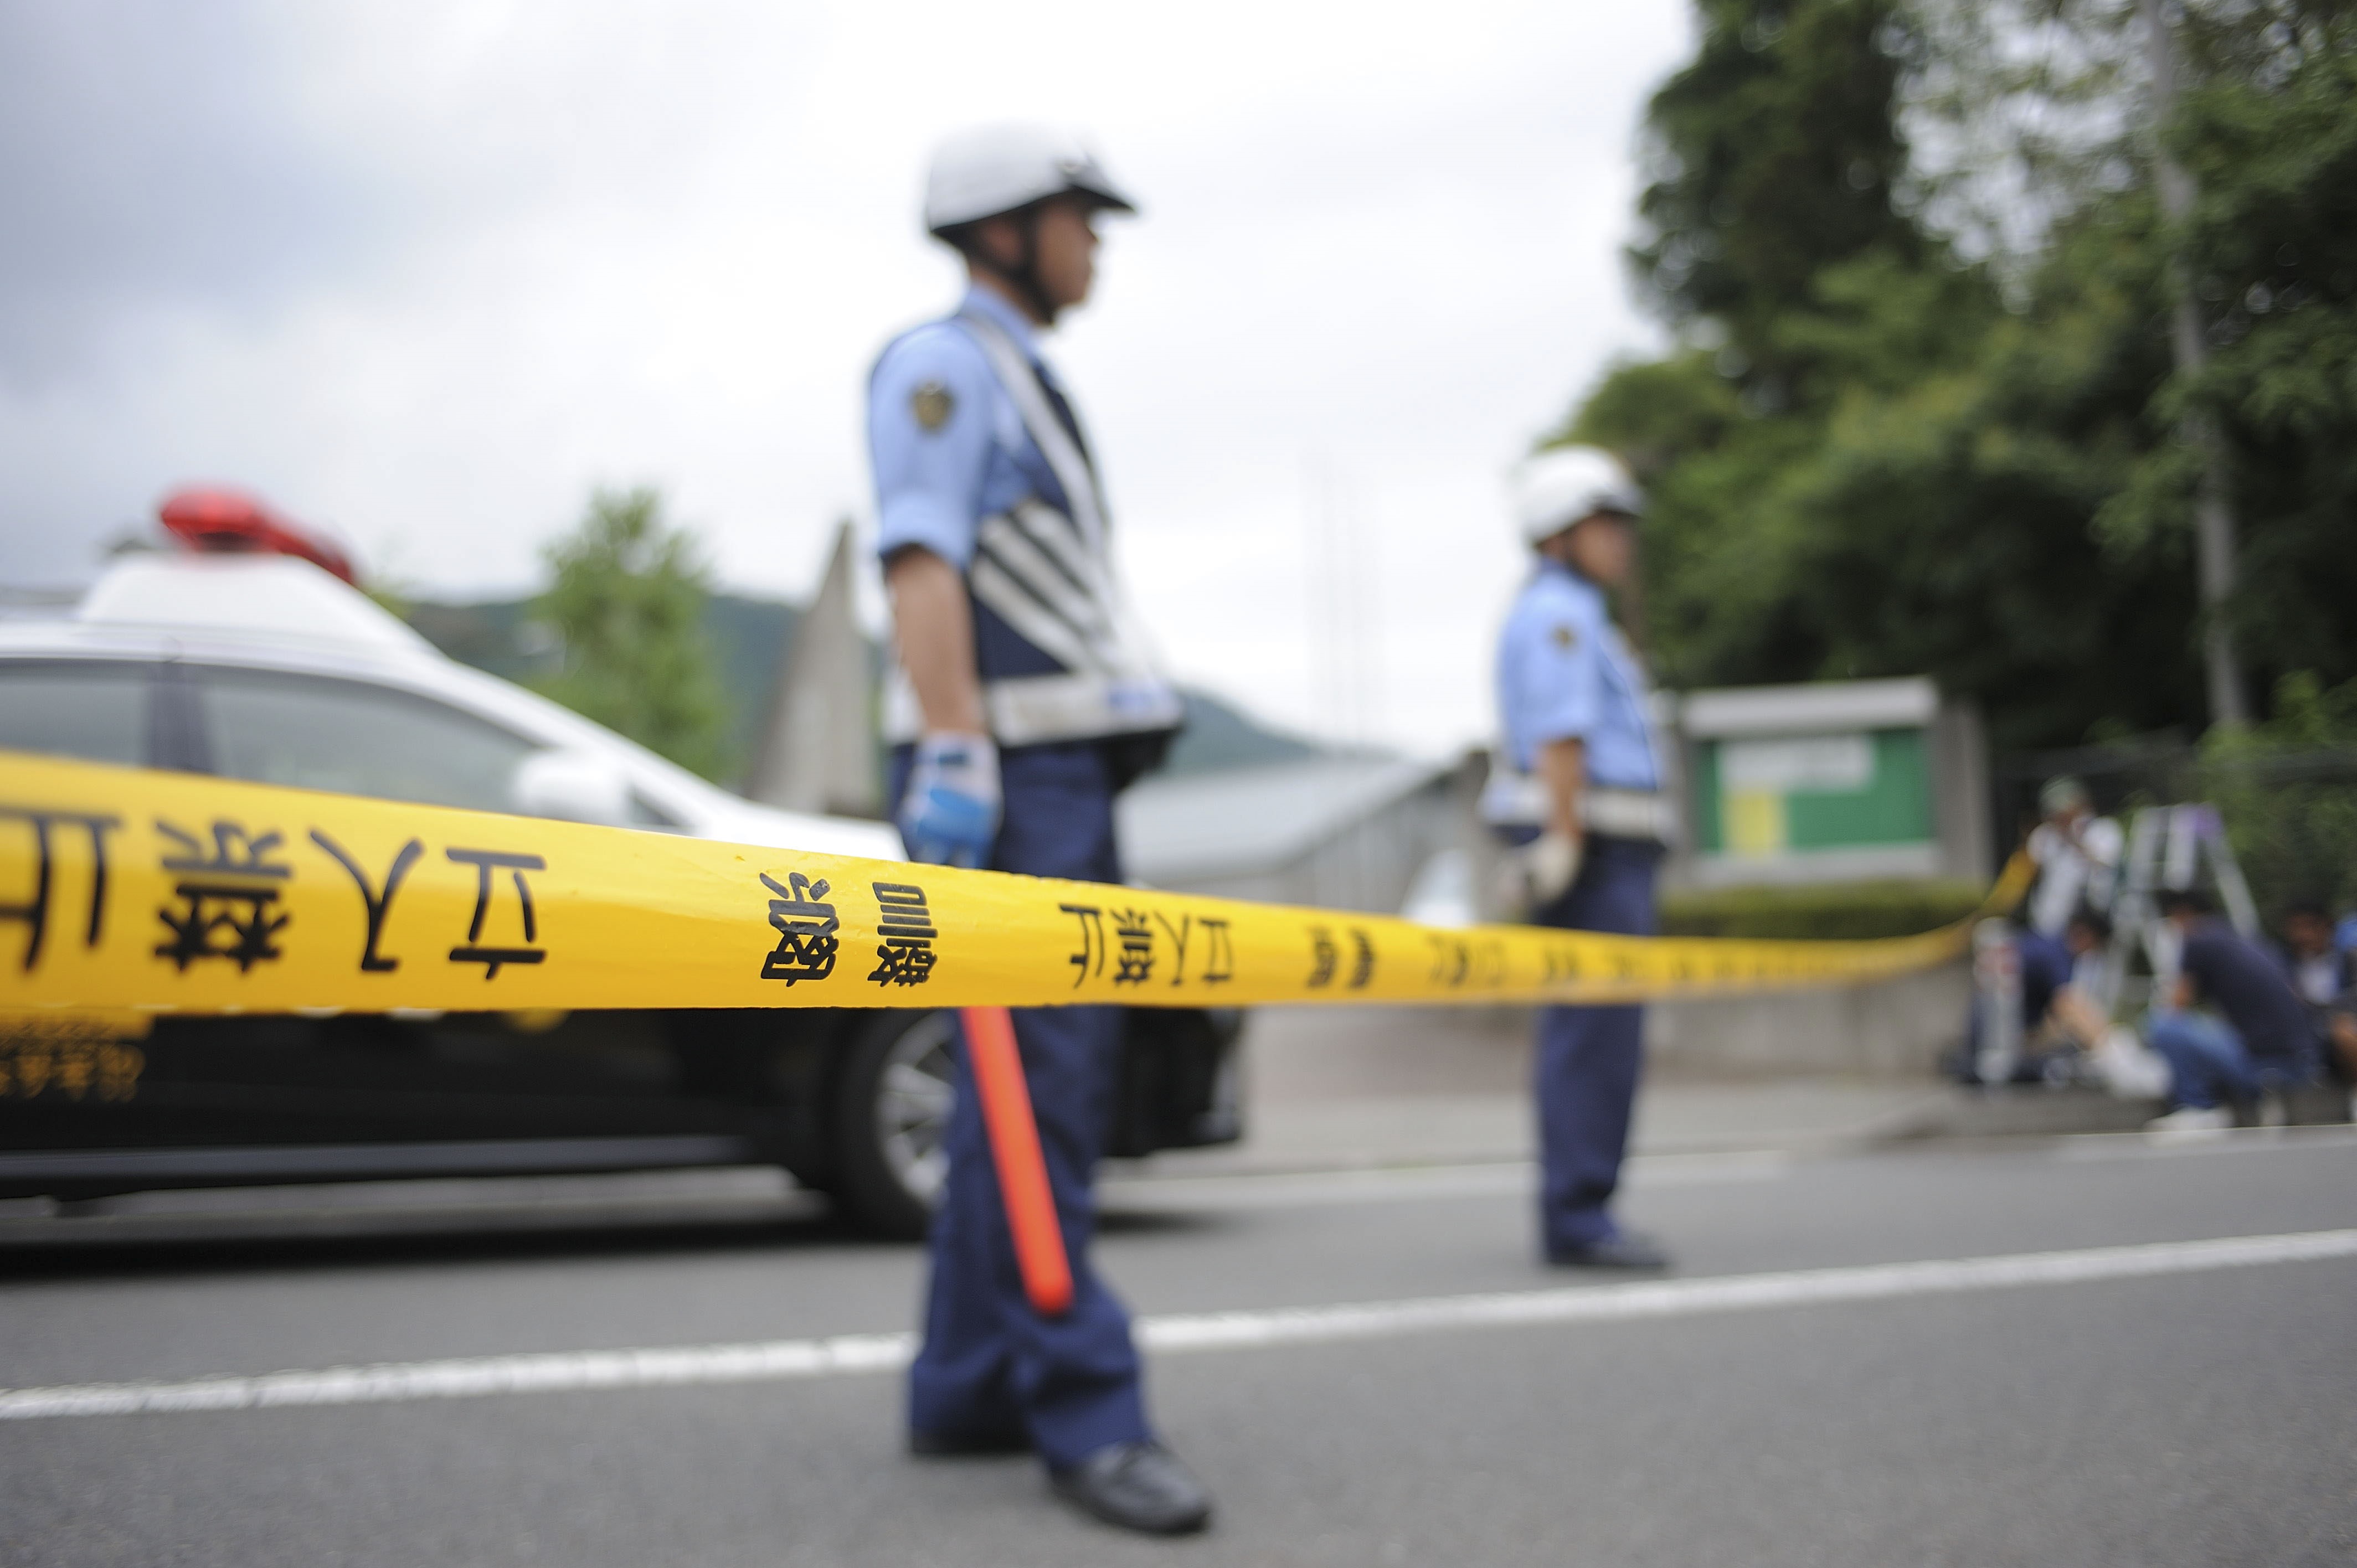 Police are seen on the site where Satoshi Uematsu carried out a knife attack in a residential care center on July 26, 2016, in Sagimahara city, Kanagawa Prefecture, Tokyo, Japan. (David Mareuil—Anadolu Agency/Getty Images)